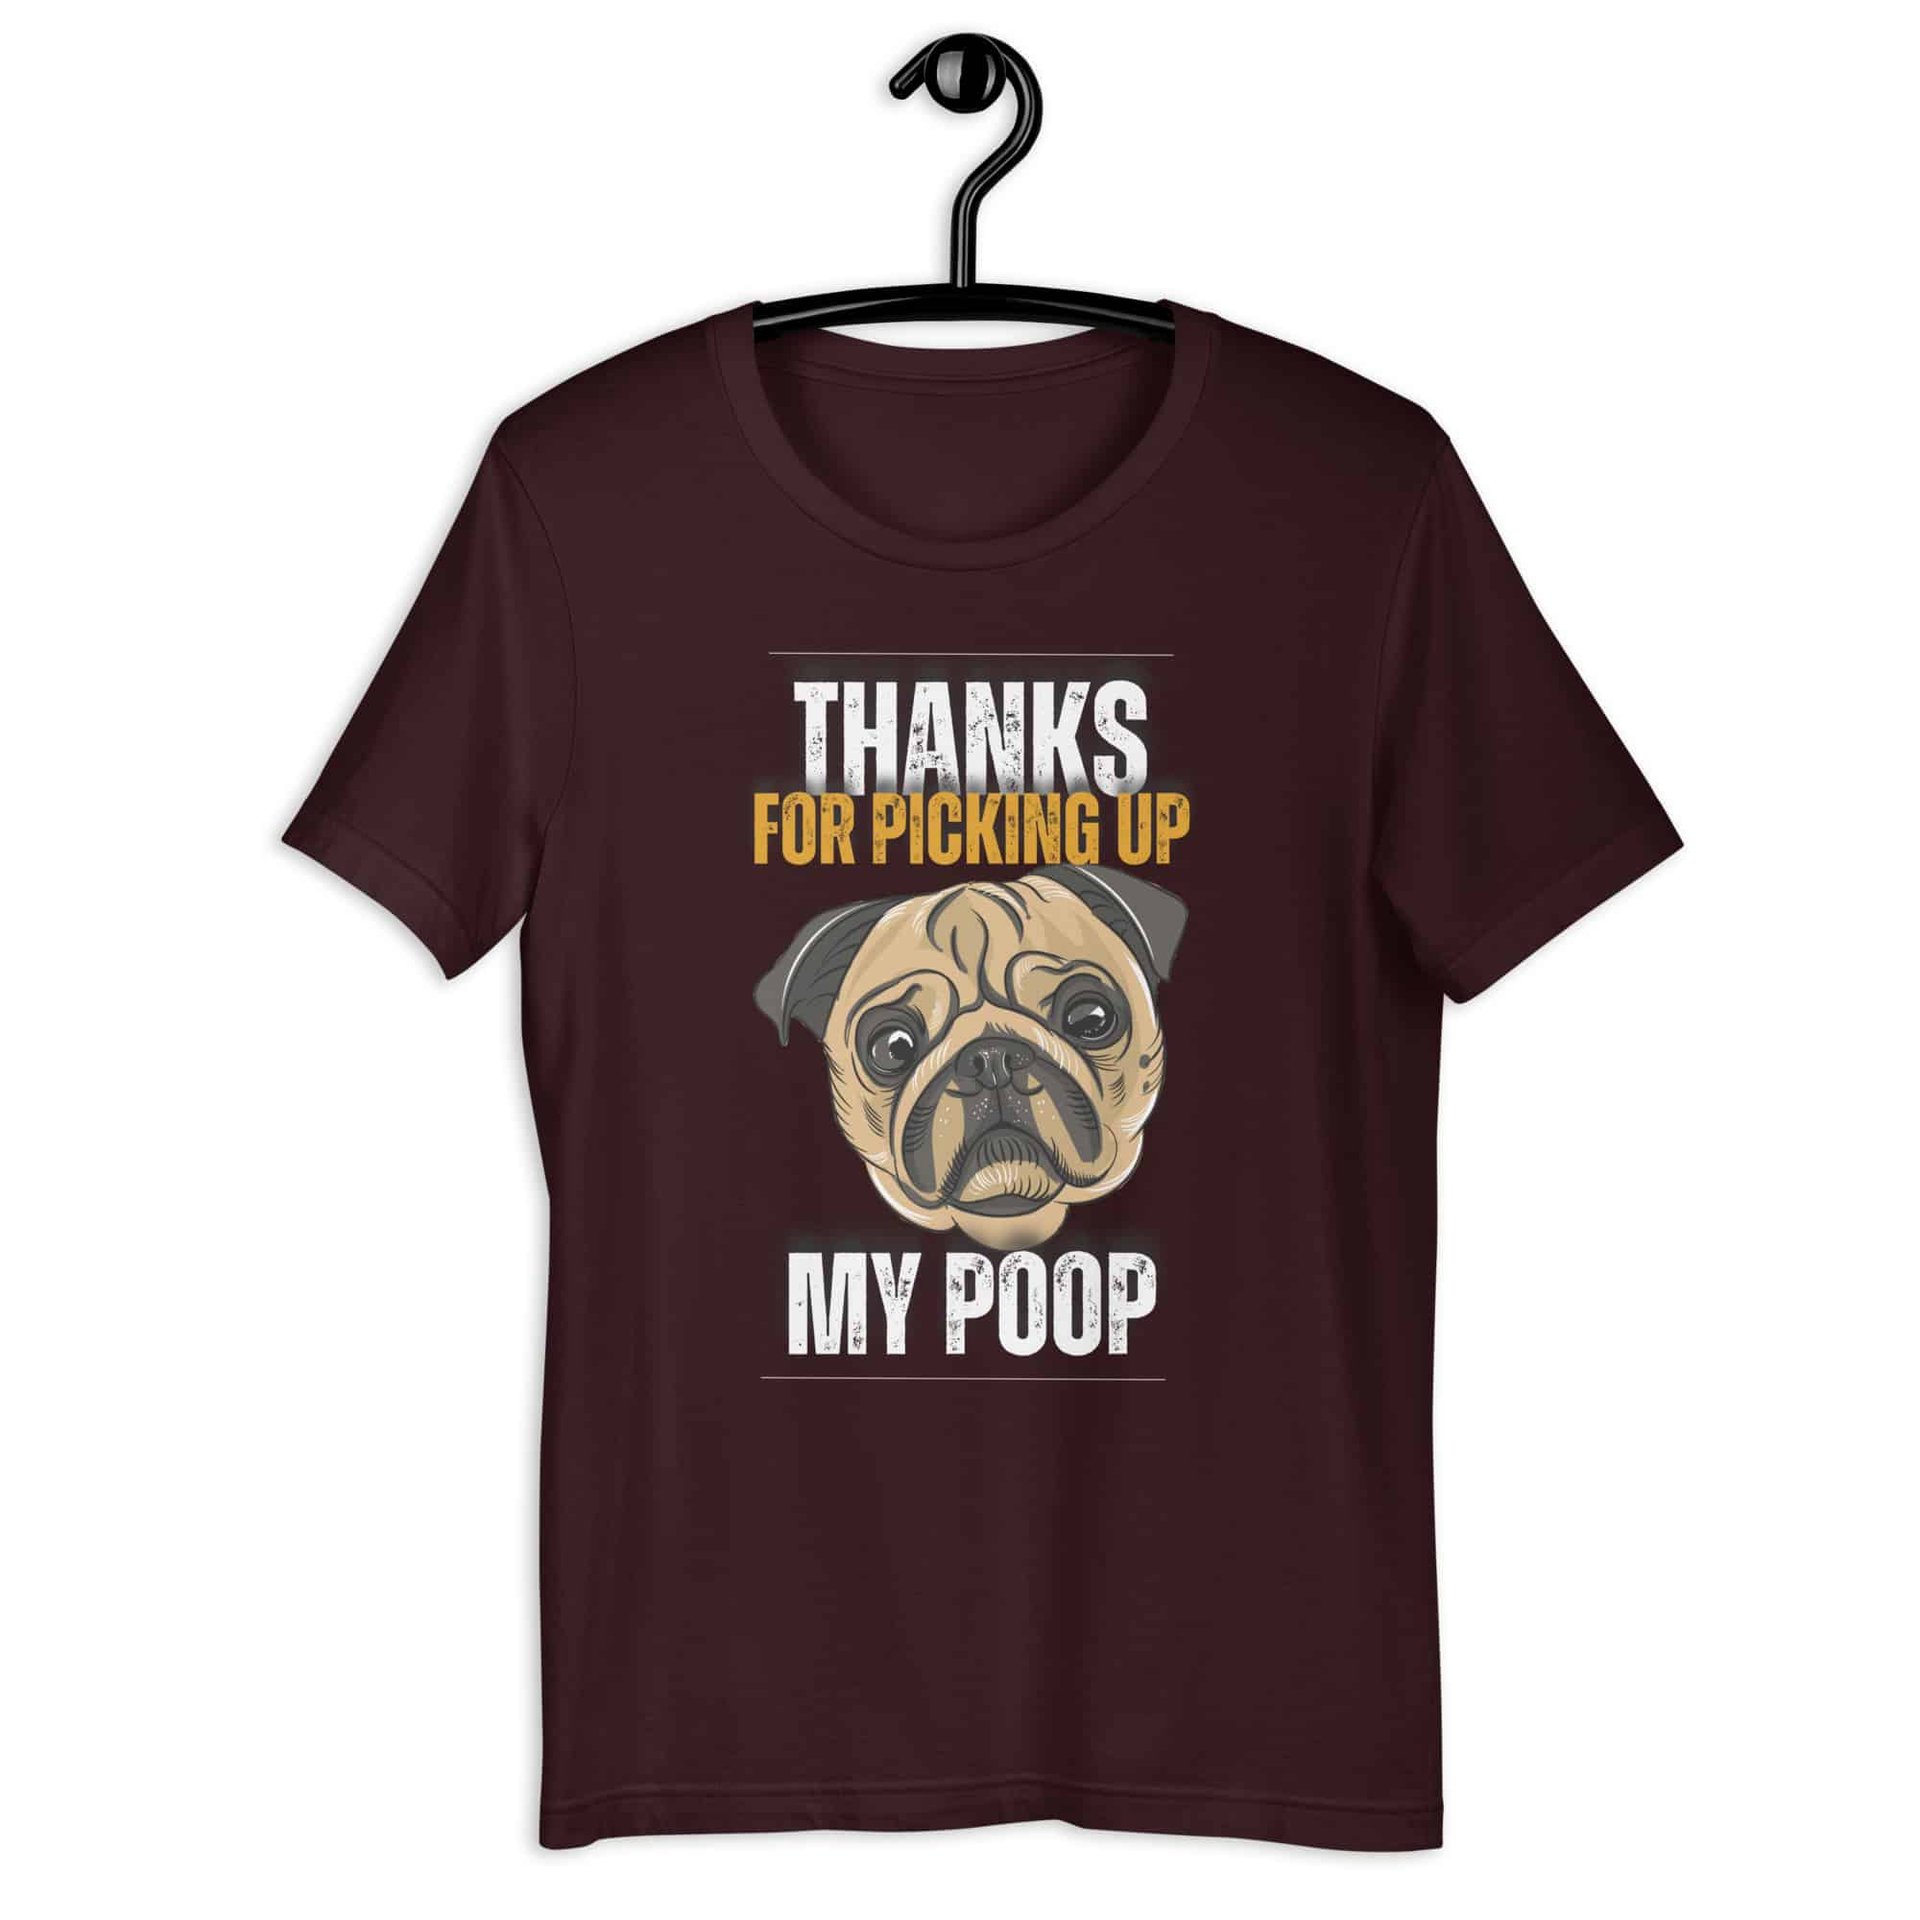 Thanks For Picking Up My POOP Funny Bulldog Unisex T-Shir. Oxblood Black